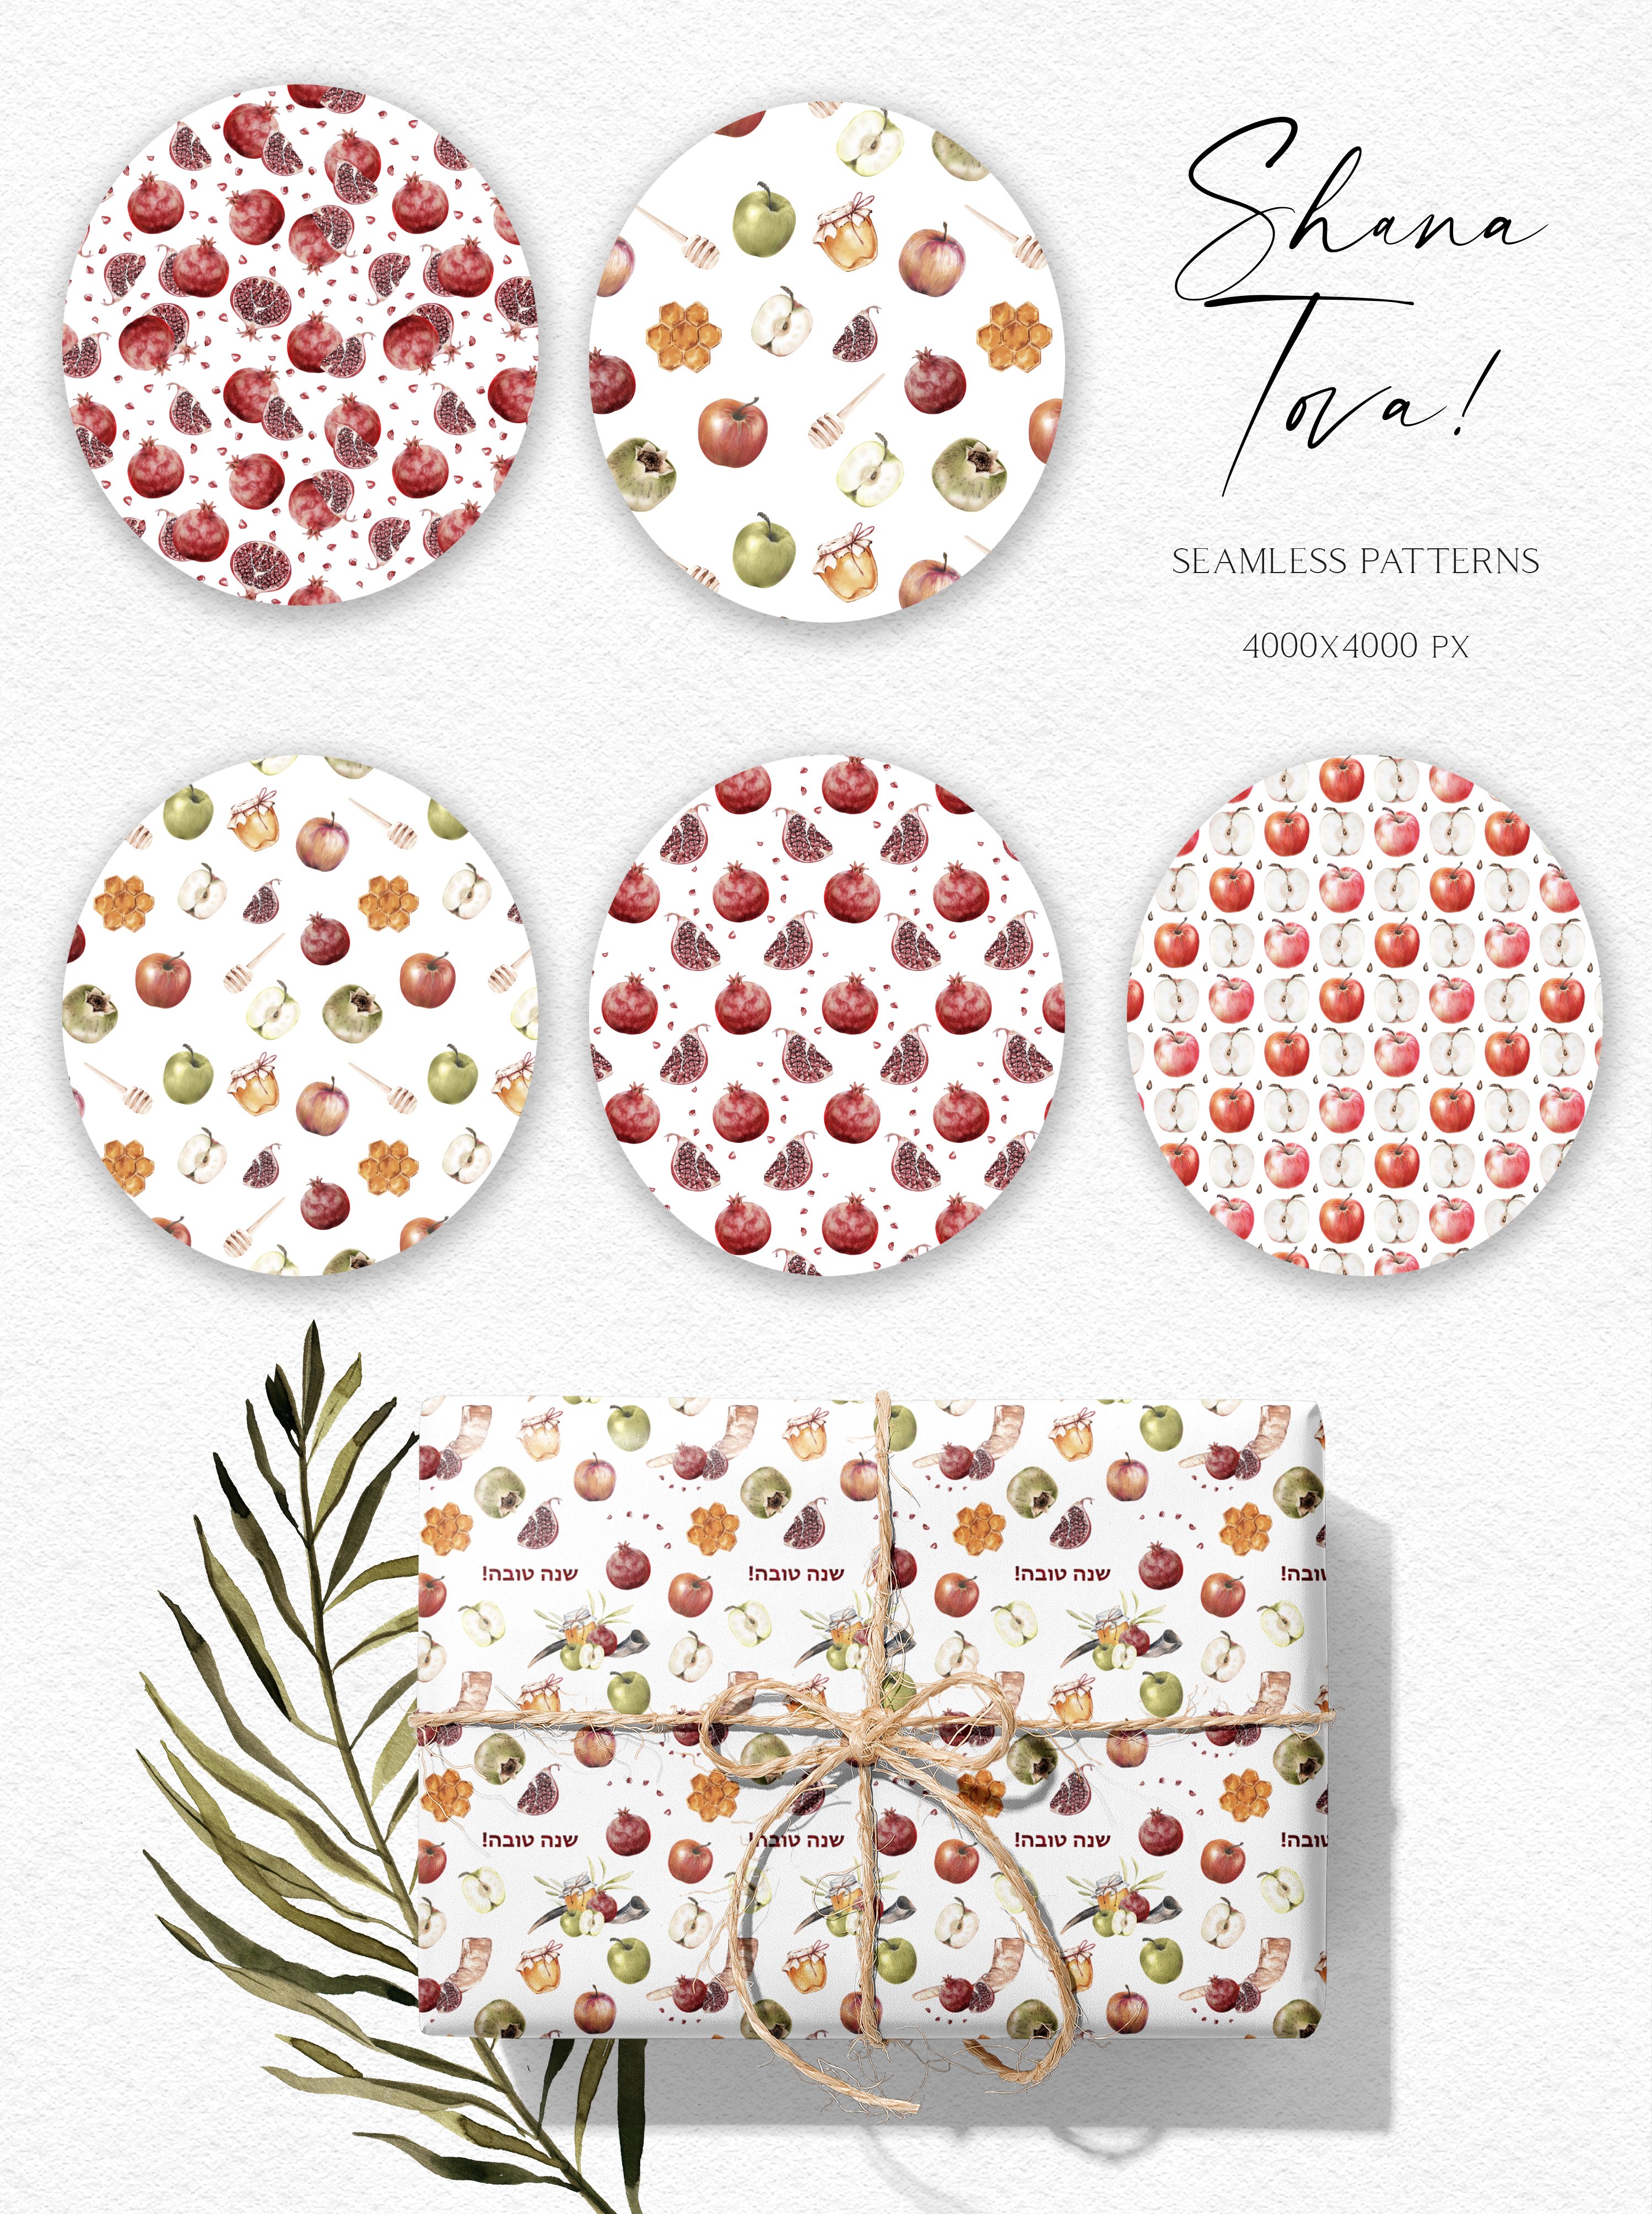 Some pomegranate patterns with the minimalistic design.